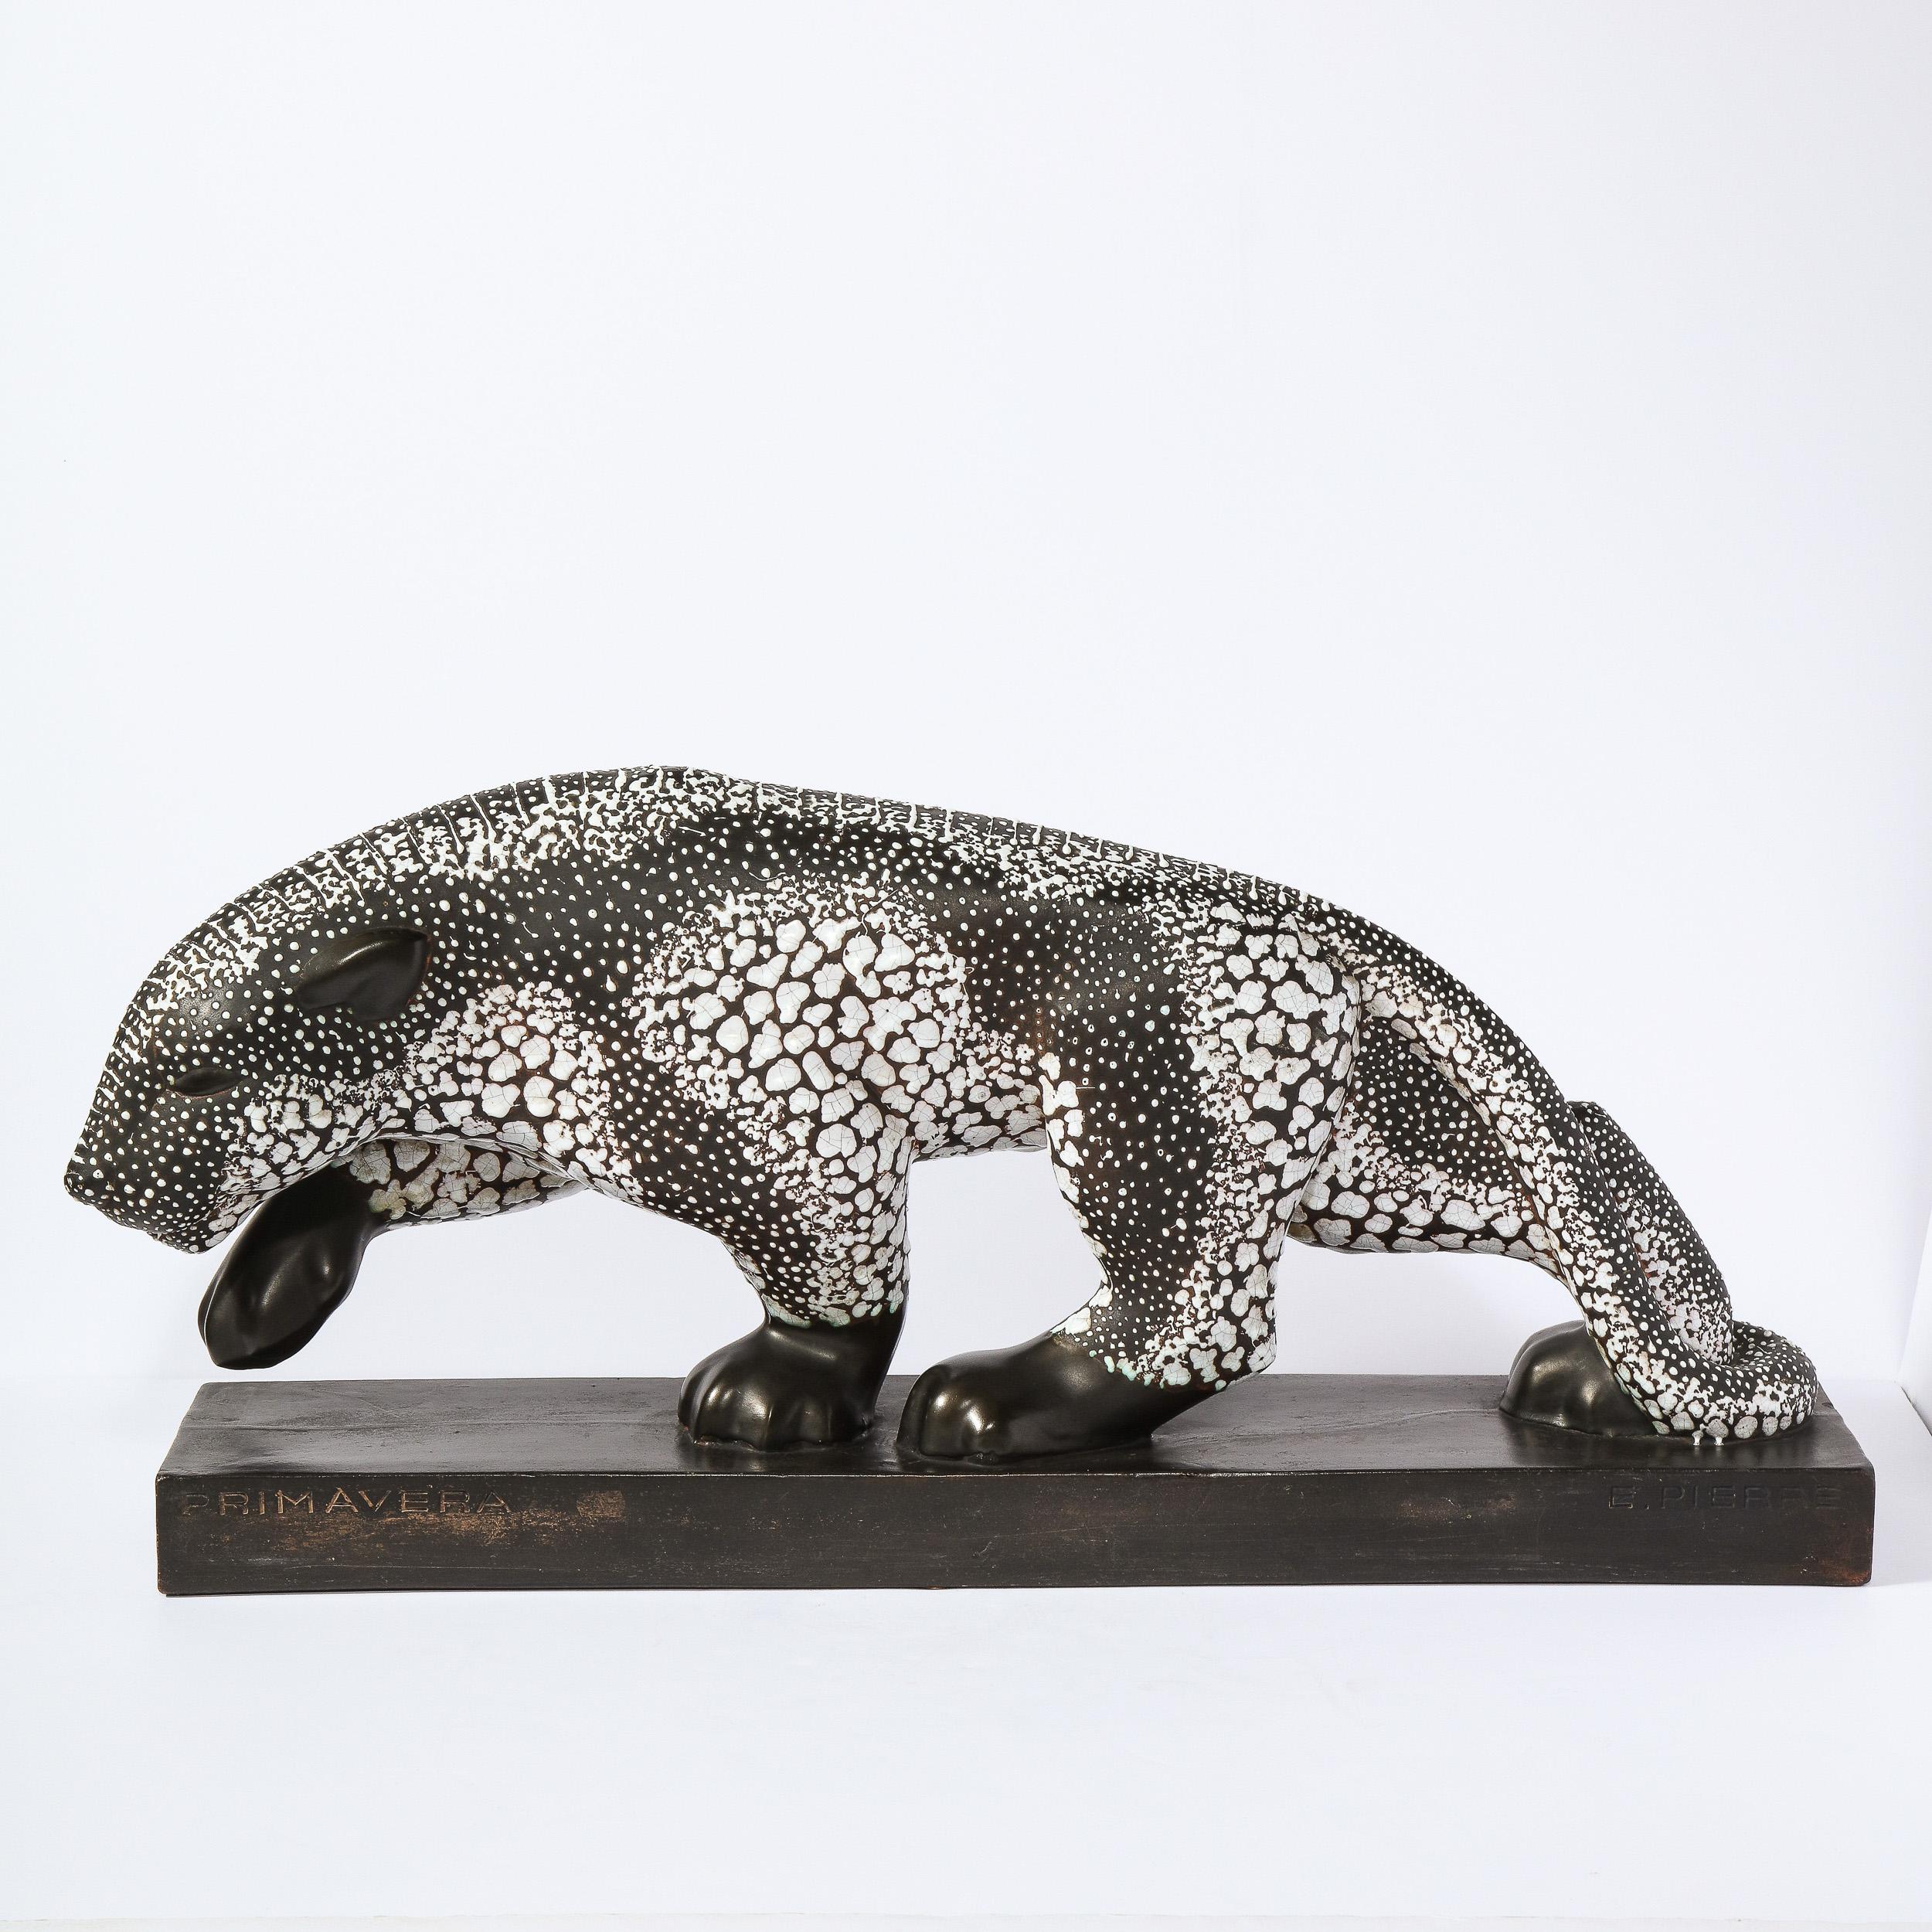 This refined and important Art Deco stylized ceramic Panther sculpture was realized in France for Atelier Primavera au Printemps, circa 1920. It offers an elegantly striding earthenware black panther with a white mottled glaze with one foot